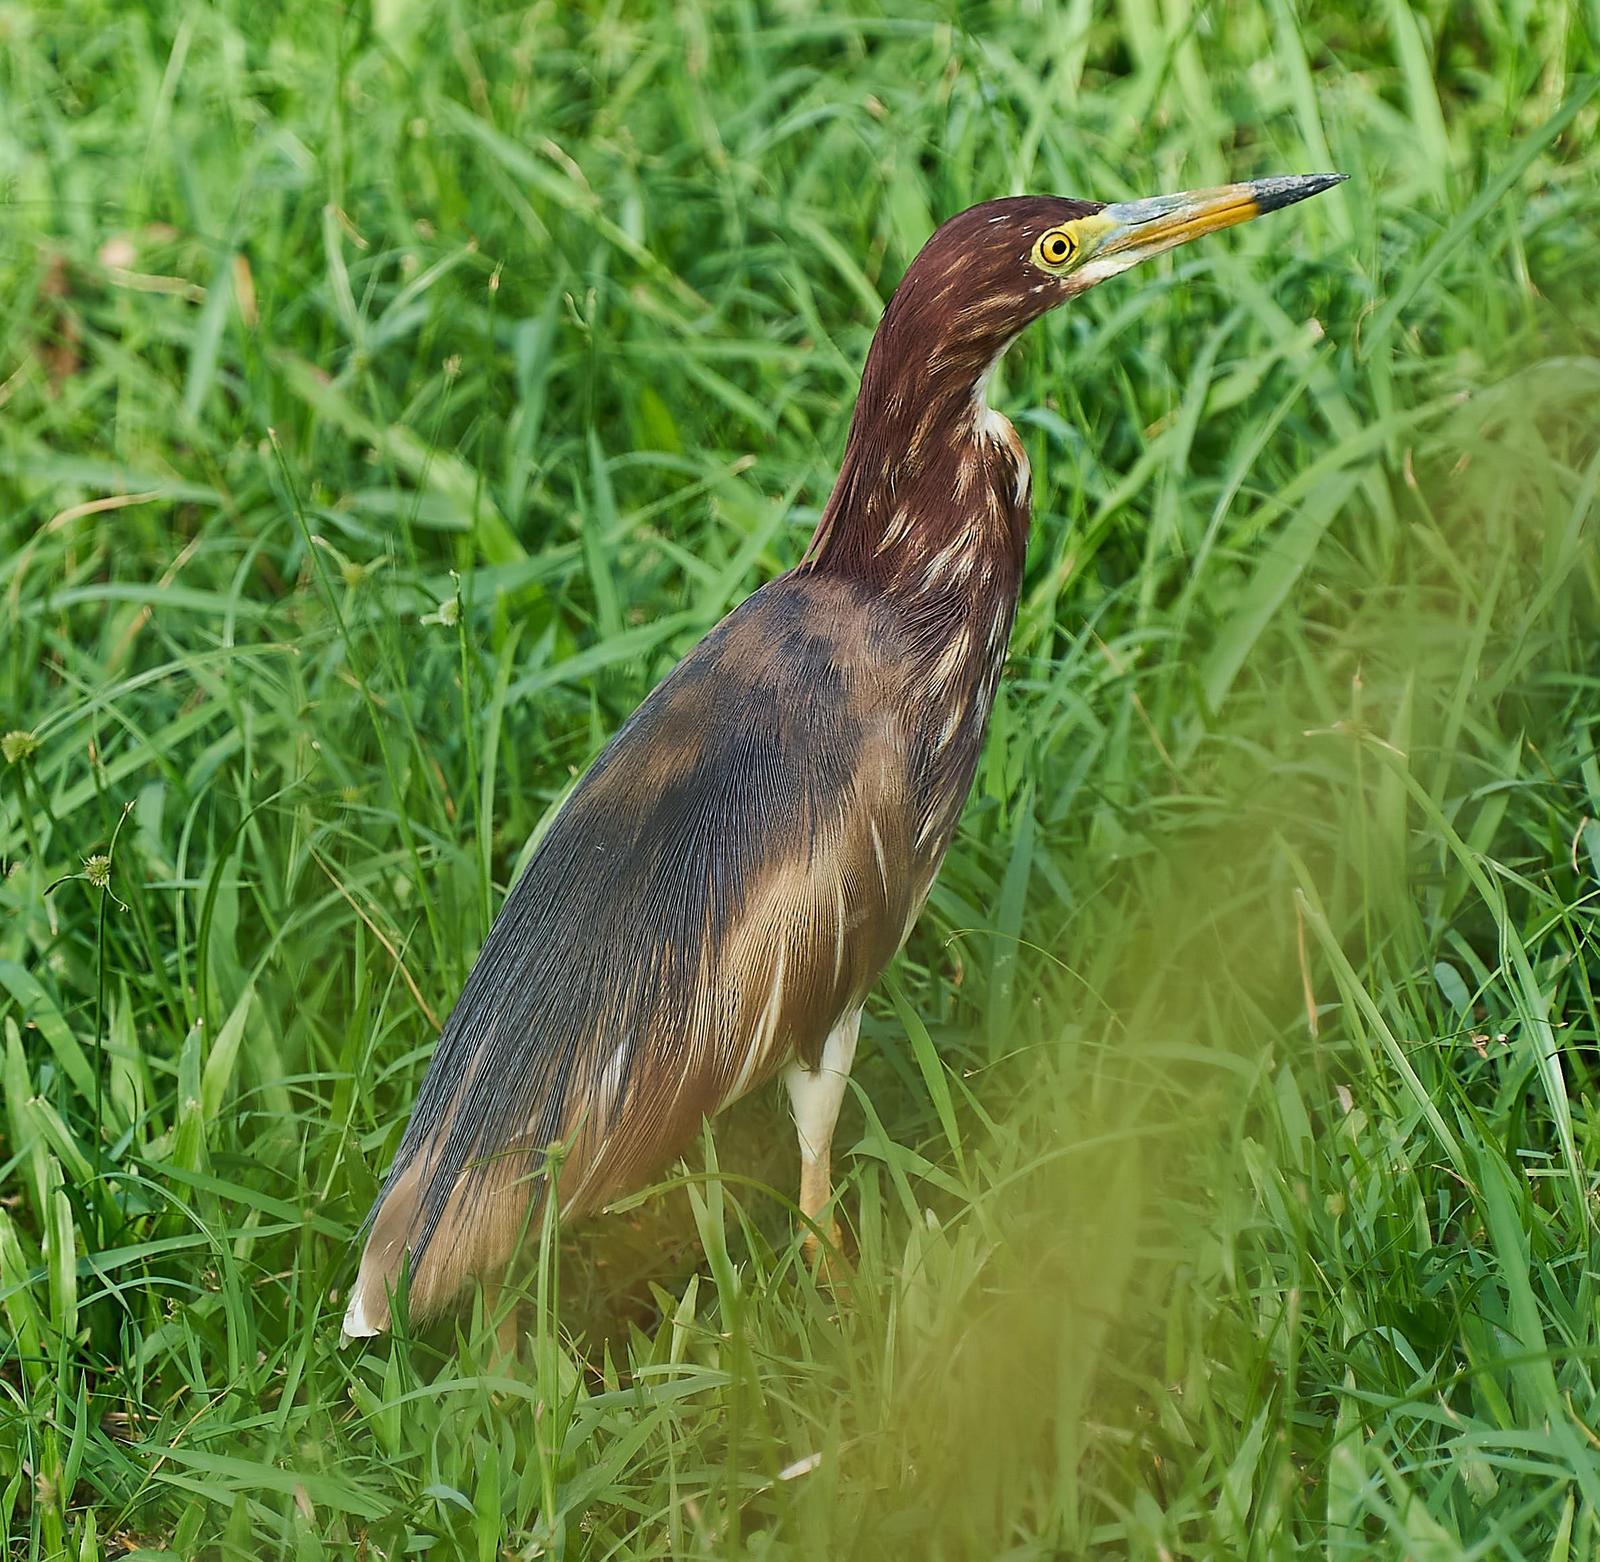 Chinese Pond-Heron Photo by Steven Cheong